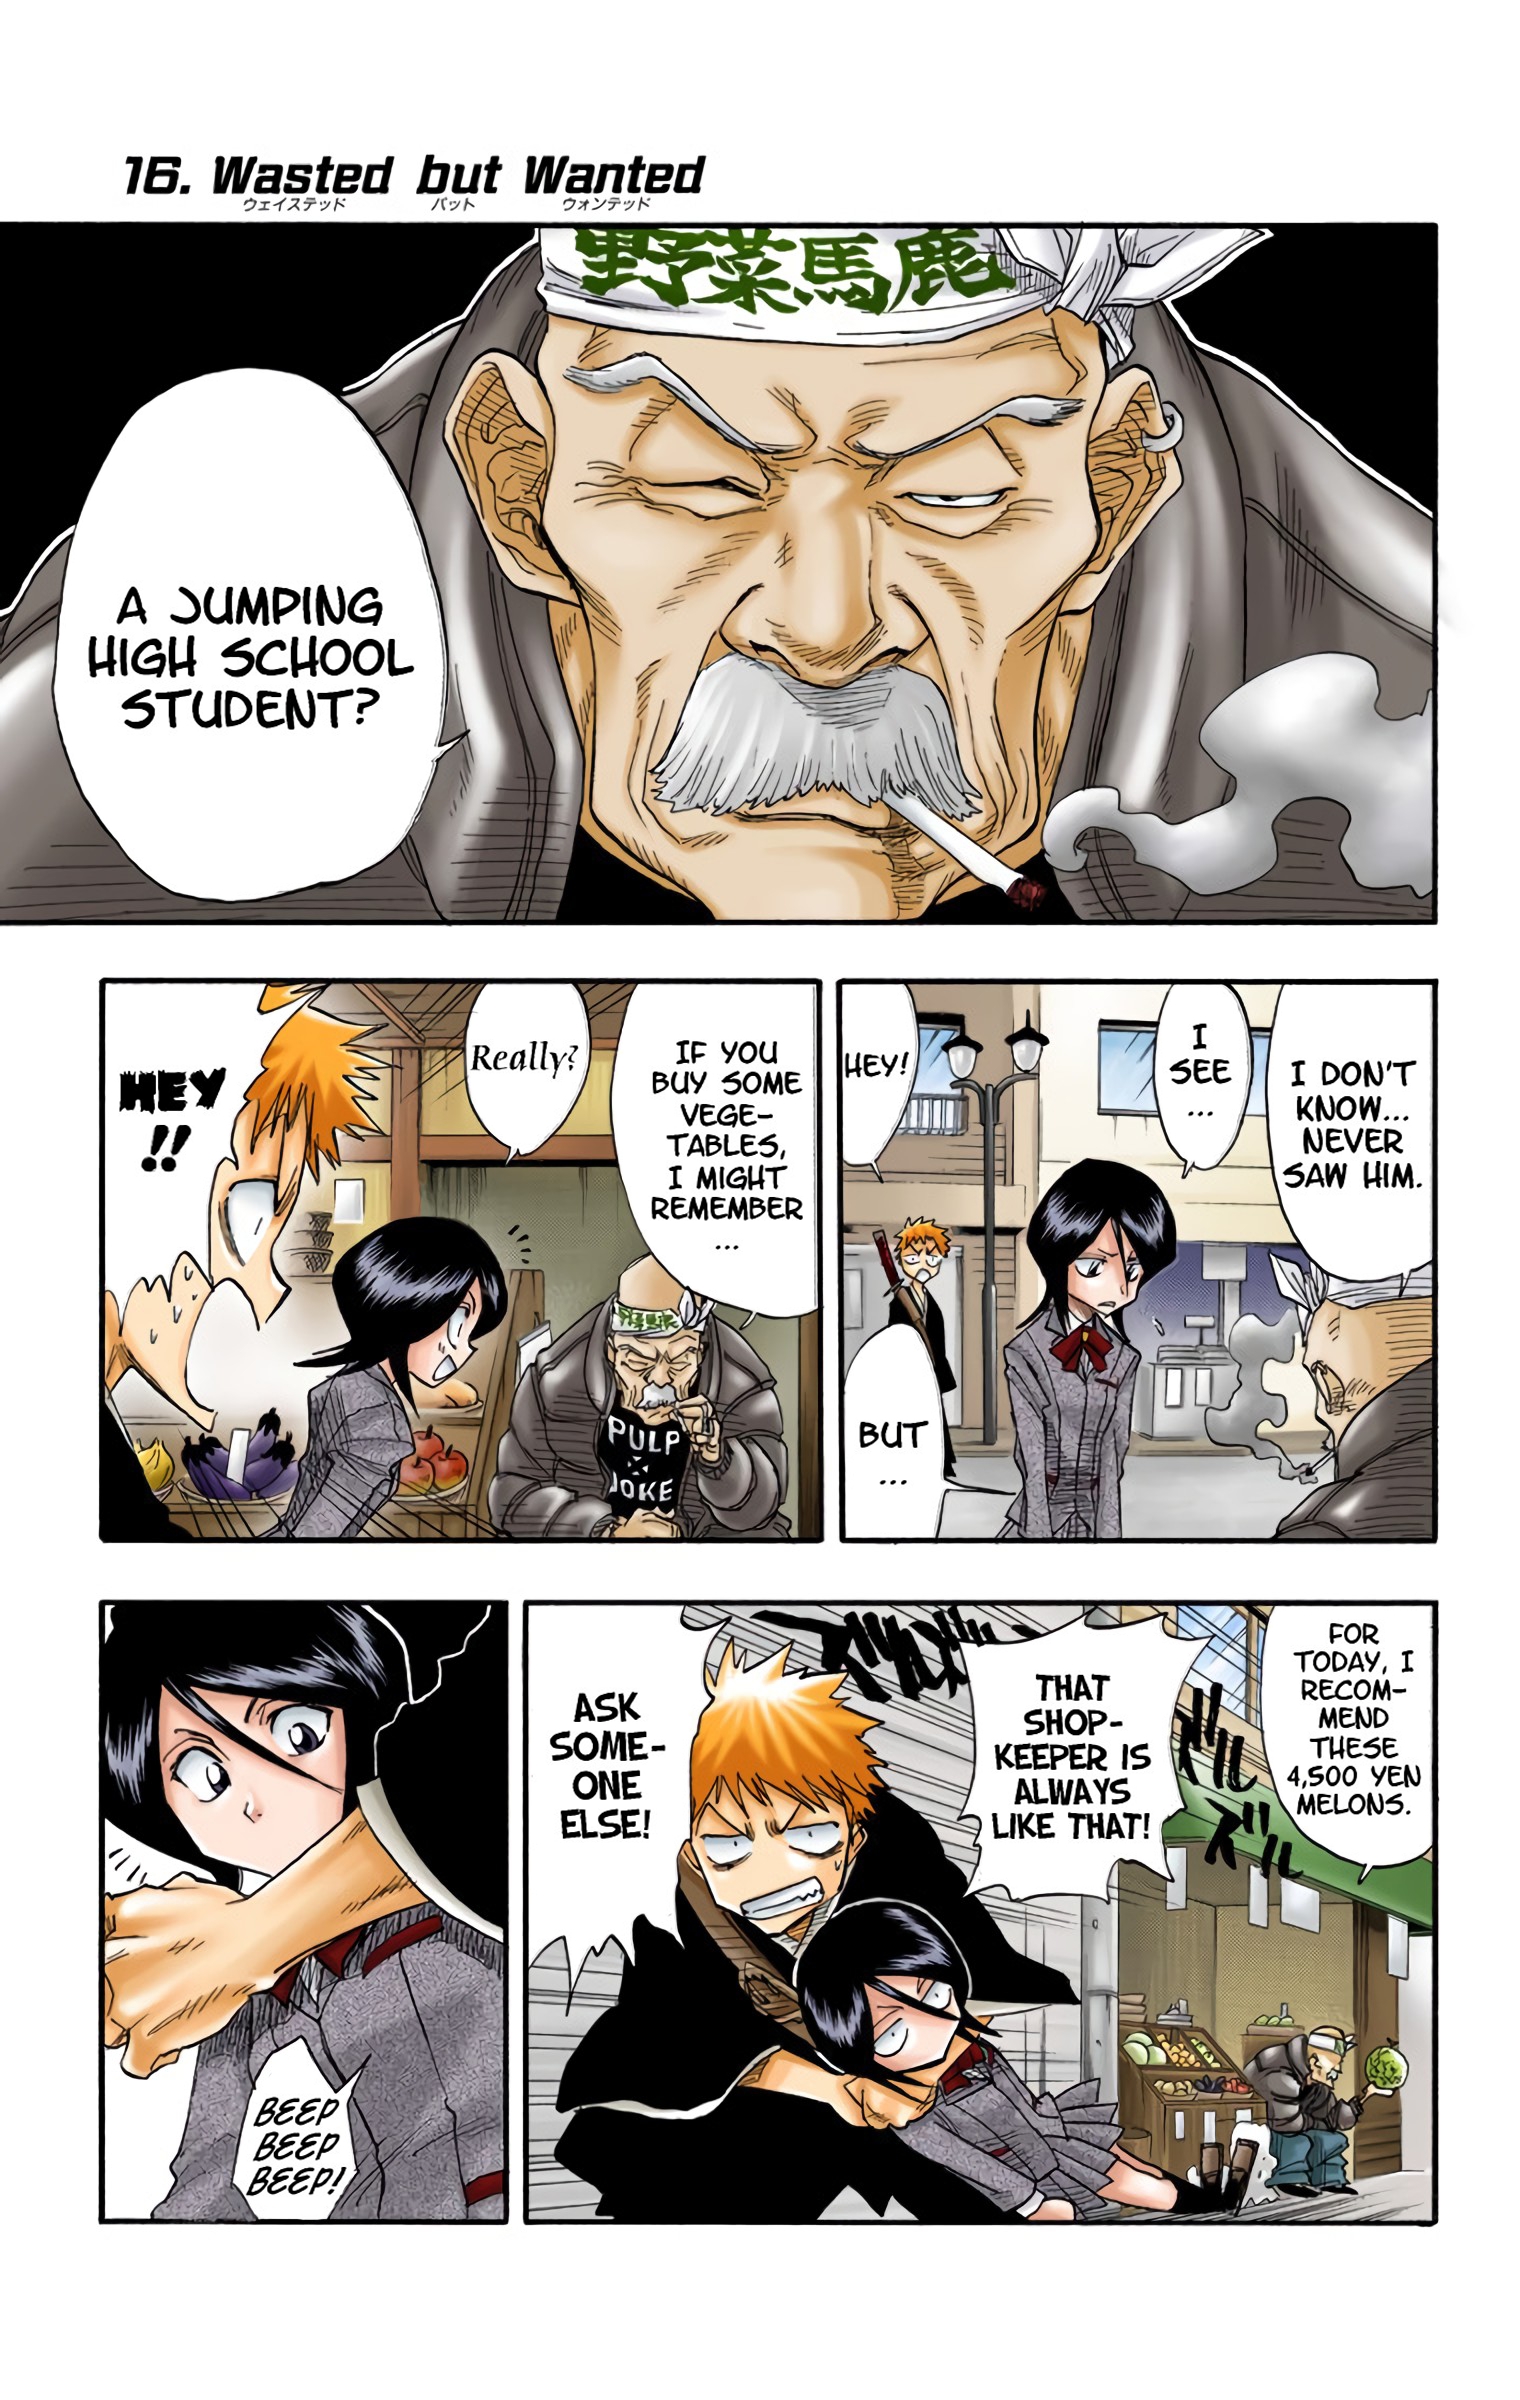 Bleach - Digital Colored Comics Vol.2 Chapter 16: Wasted But Wanted - Picture 1